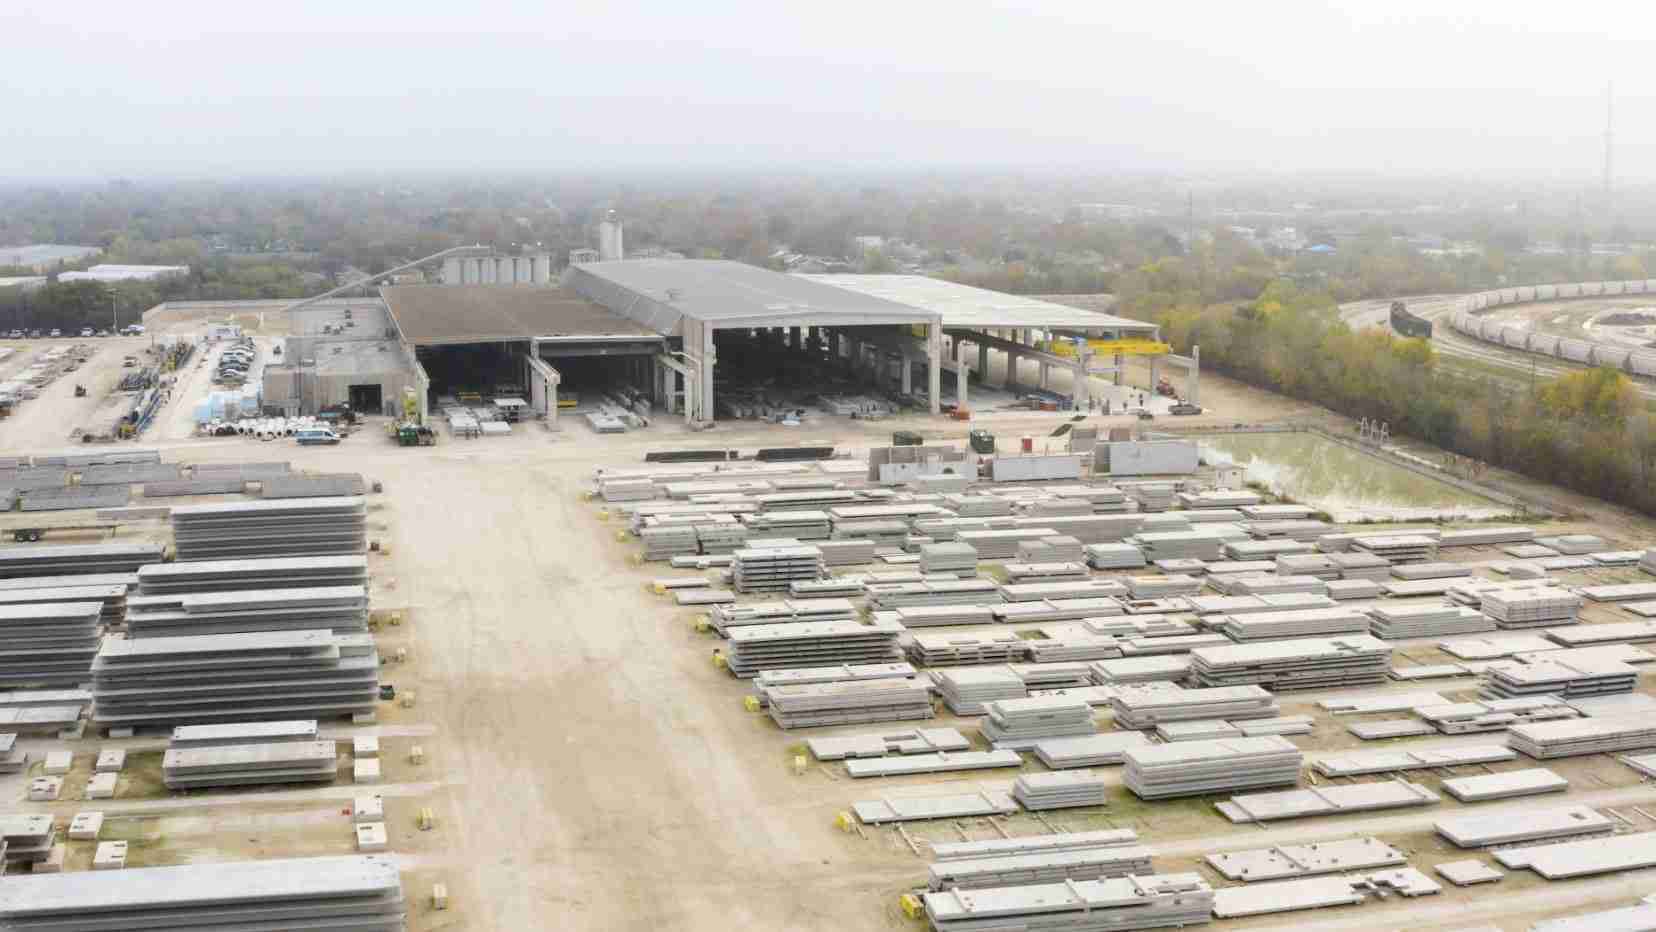 An aerial view of Tindall's San Antonio, Texas facility where precast concrete slabs are manufactured.